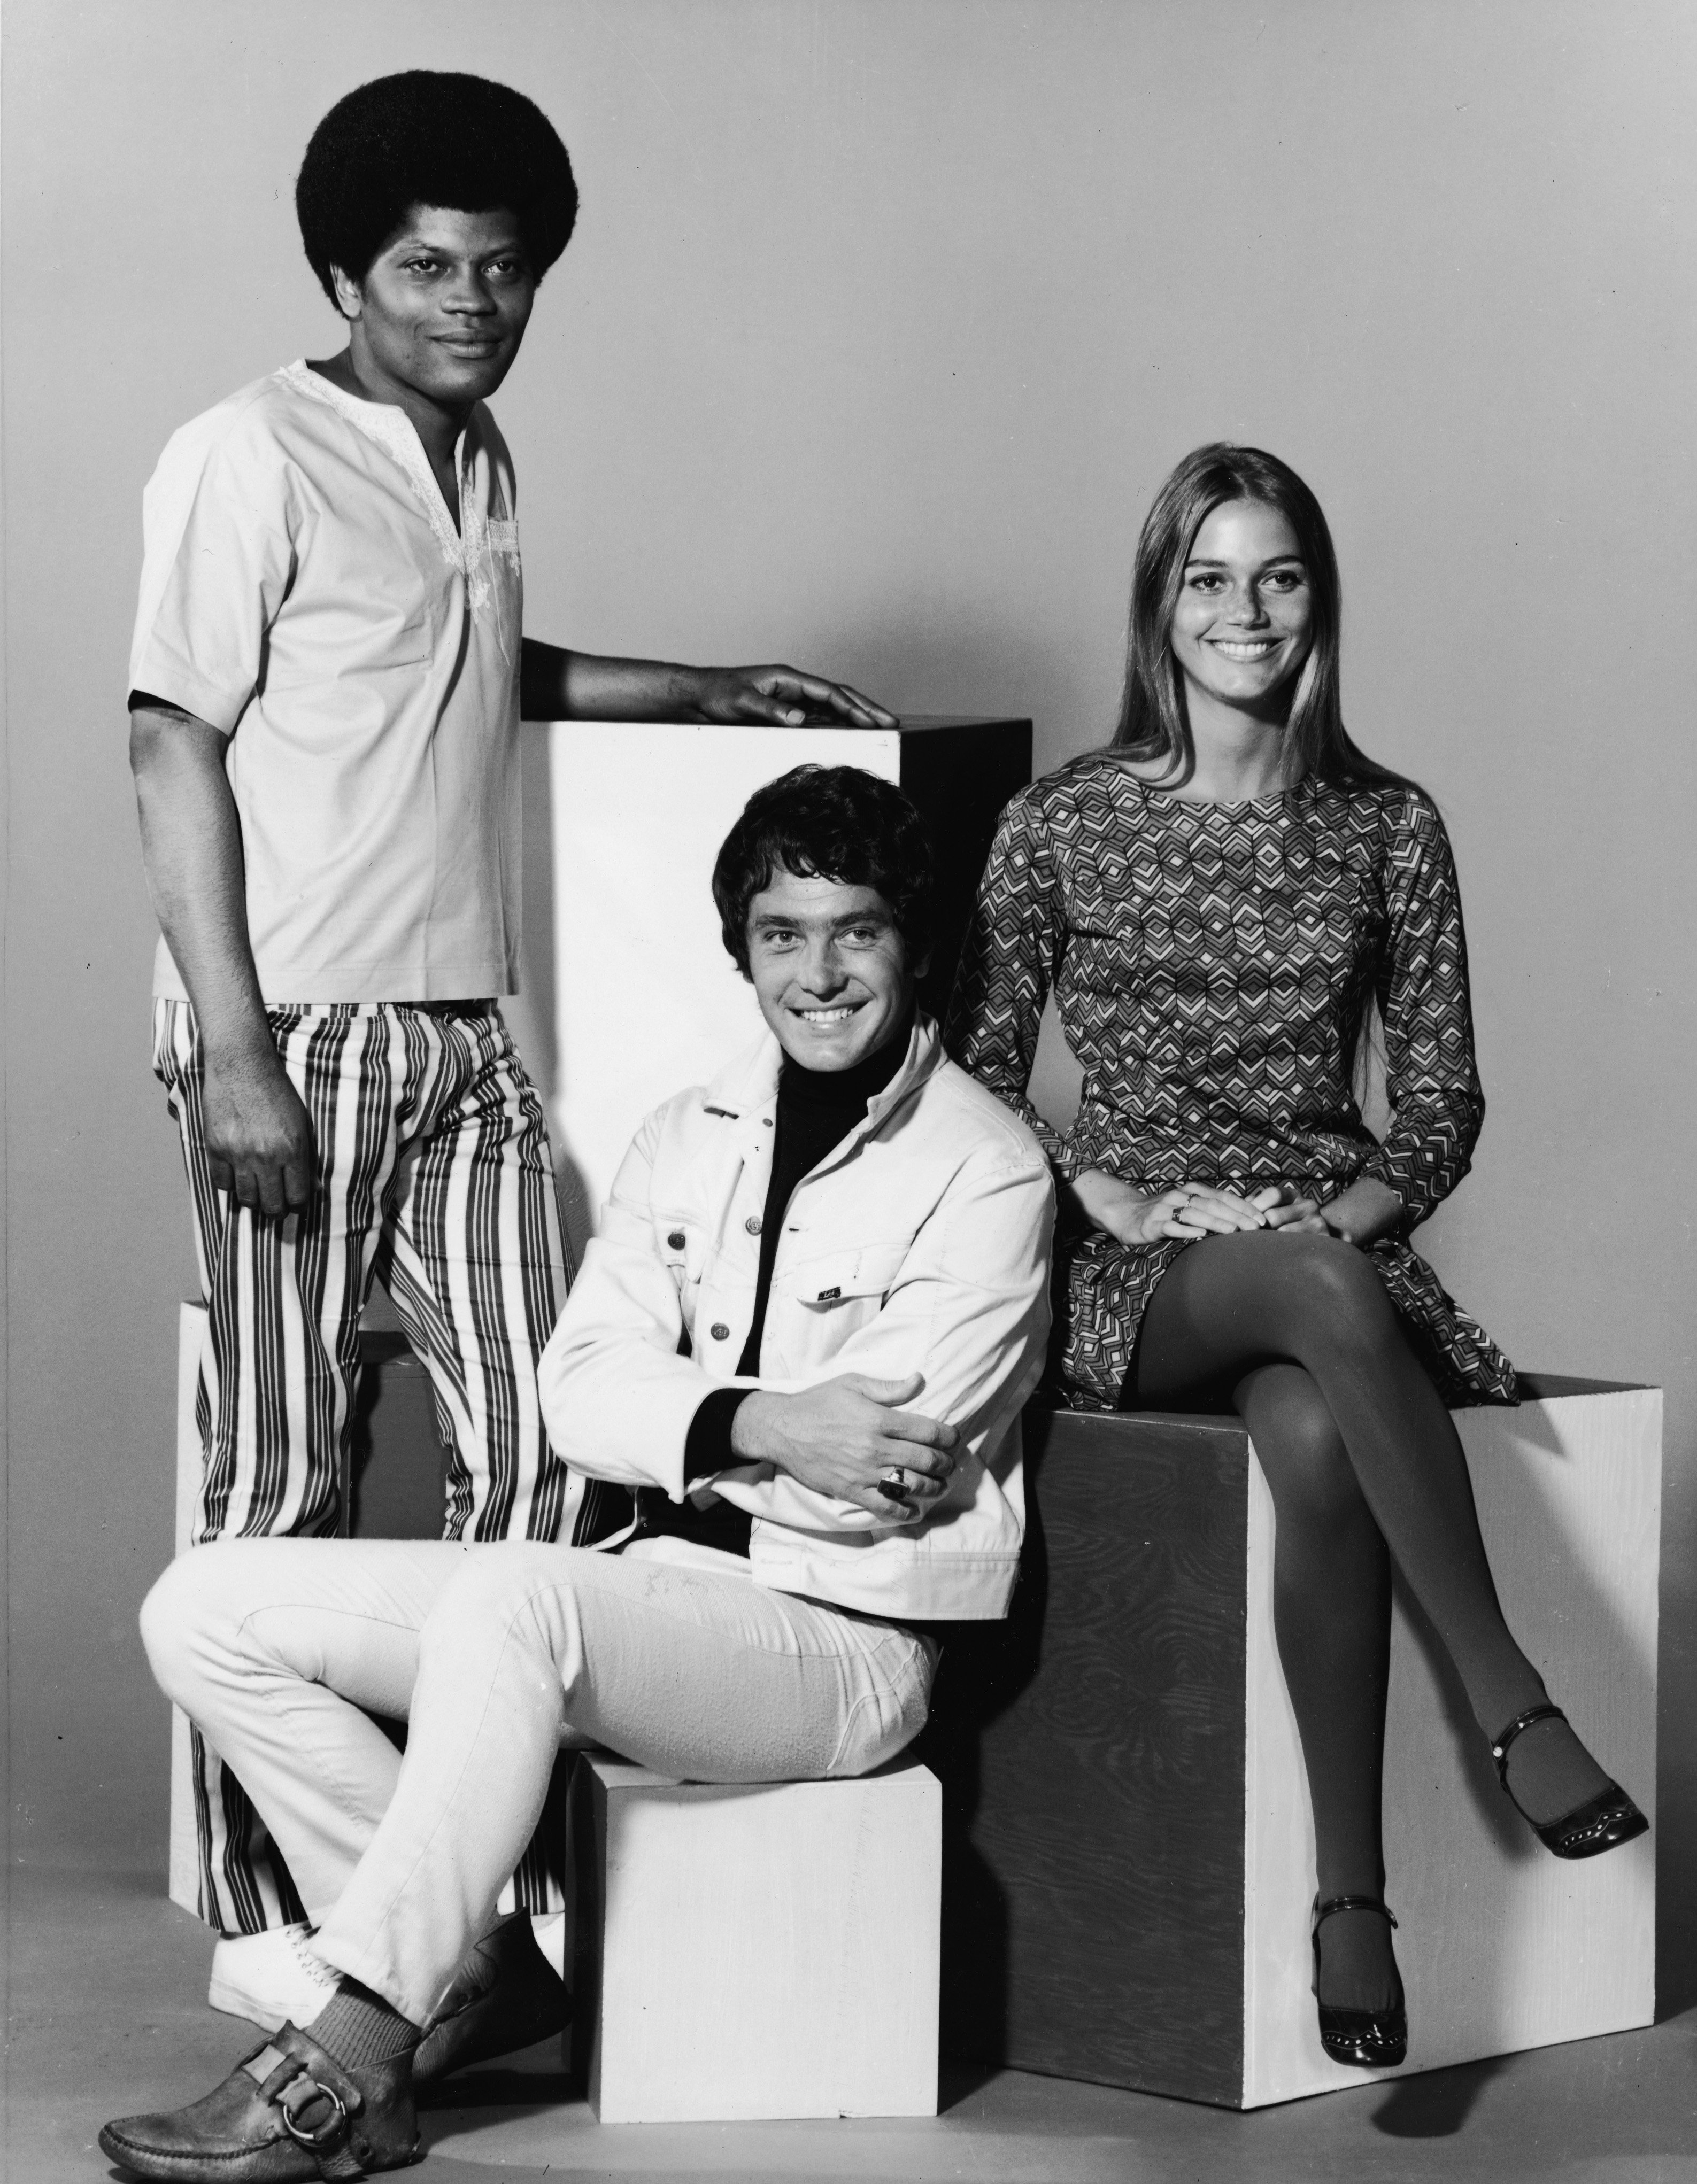 Peggy Lipton posing with Clarence Williams III and Michael Cole for the show "The Mod Squad" in 1968. | Photo: Getty Images / GlobalImagesUkraine